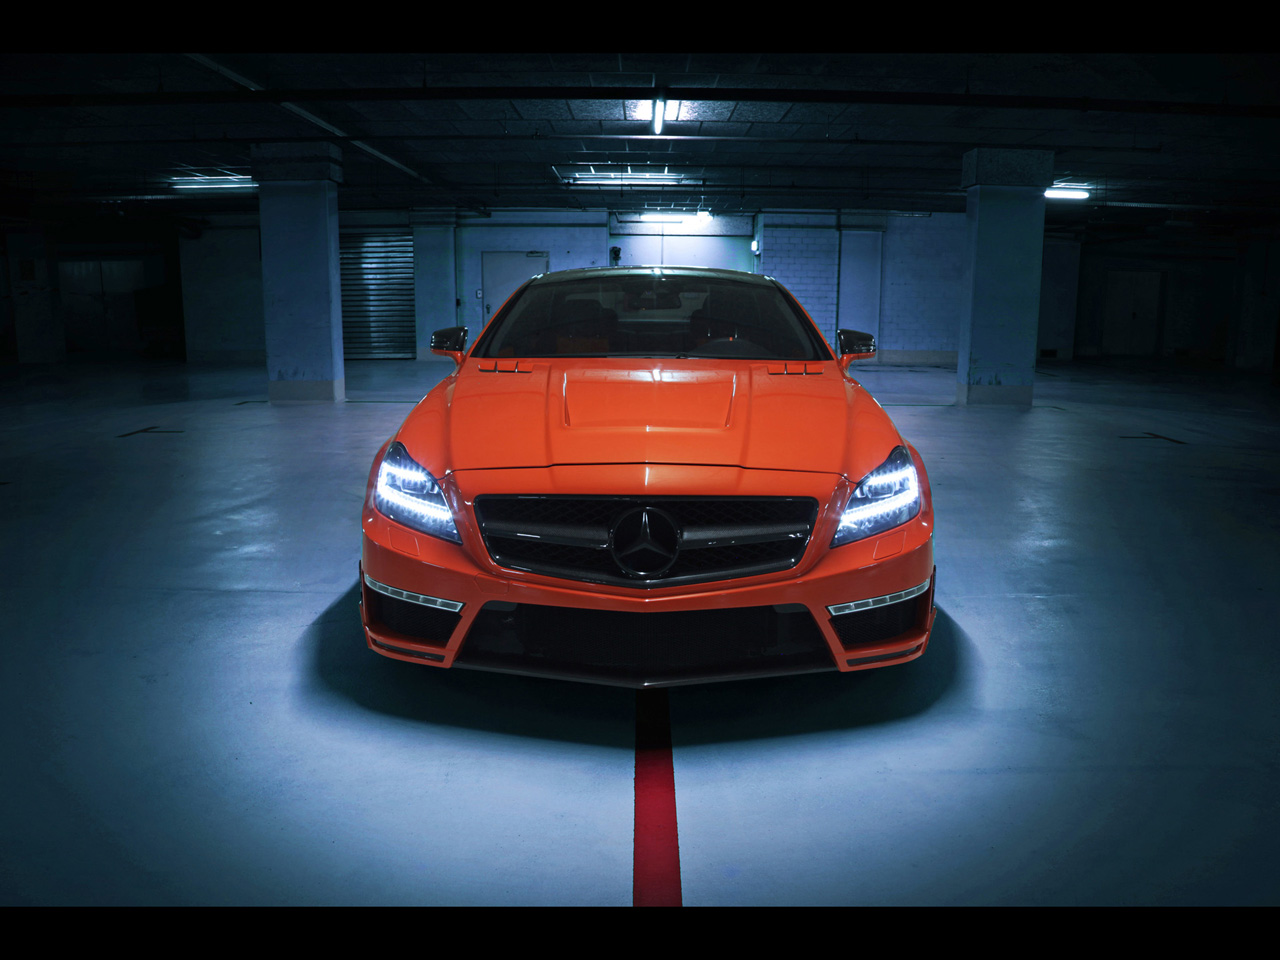 german-special-customs-mercedes-benz-cls63-amg-stealth